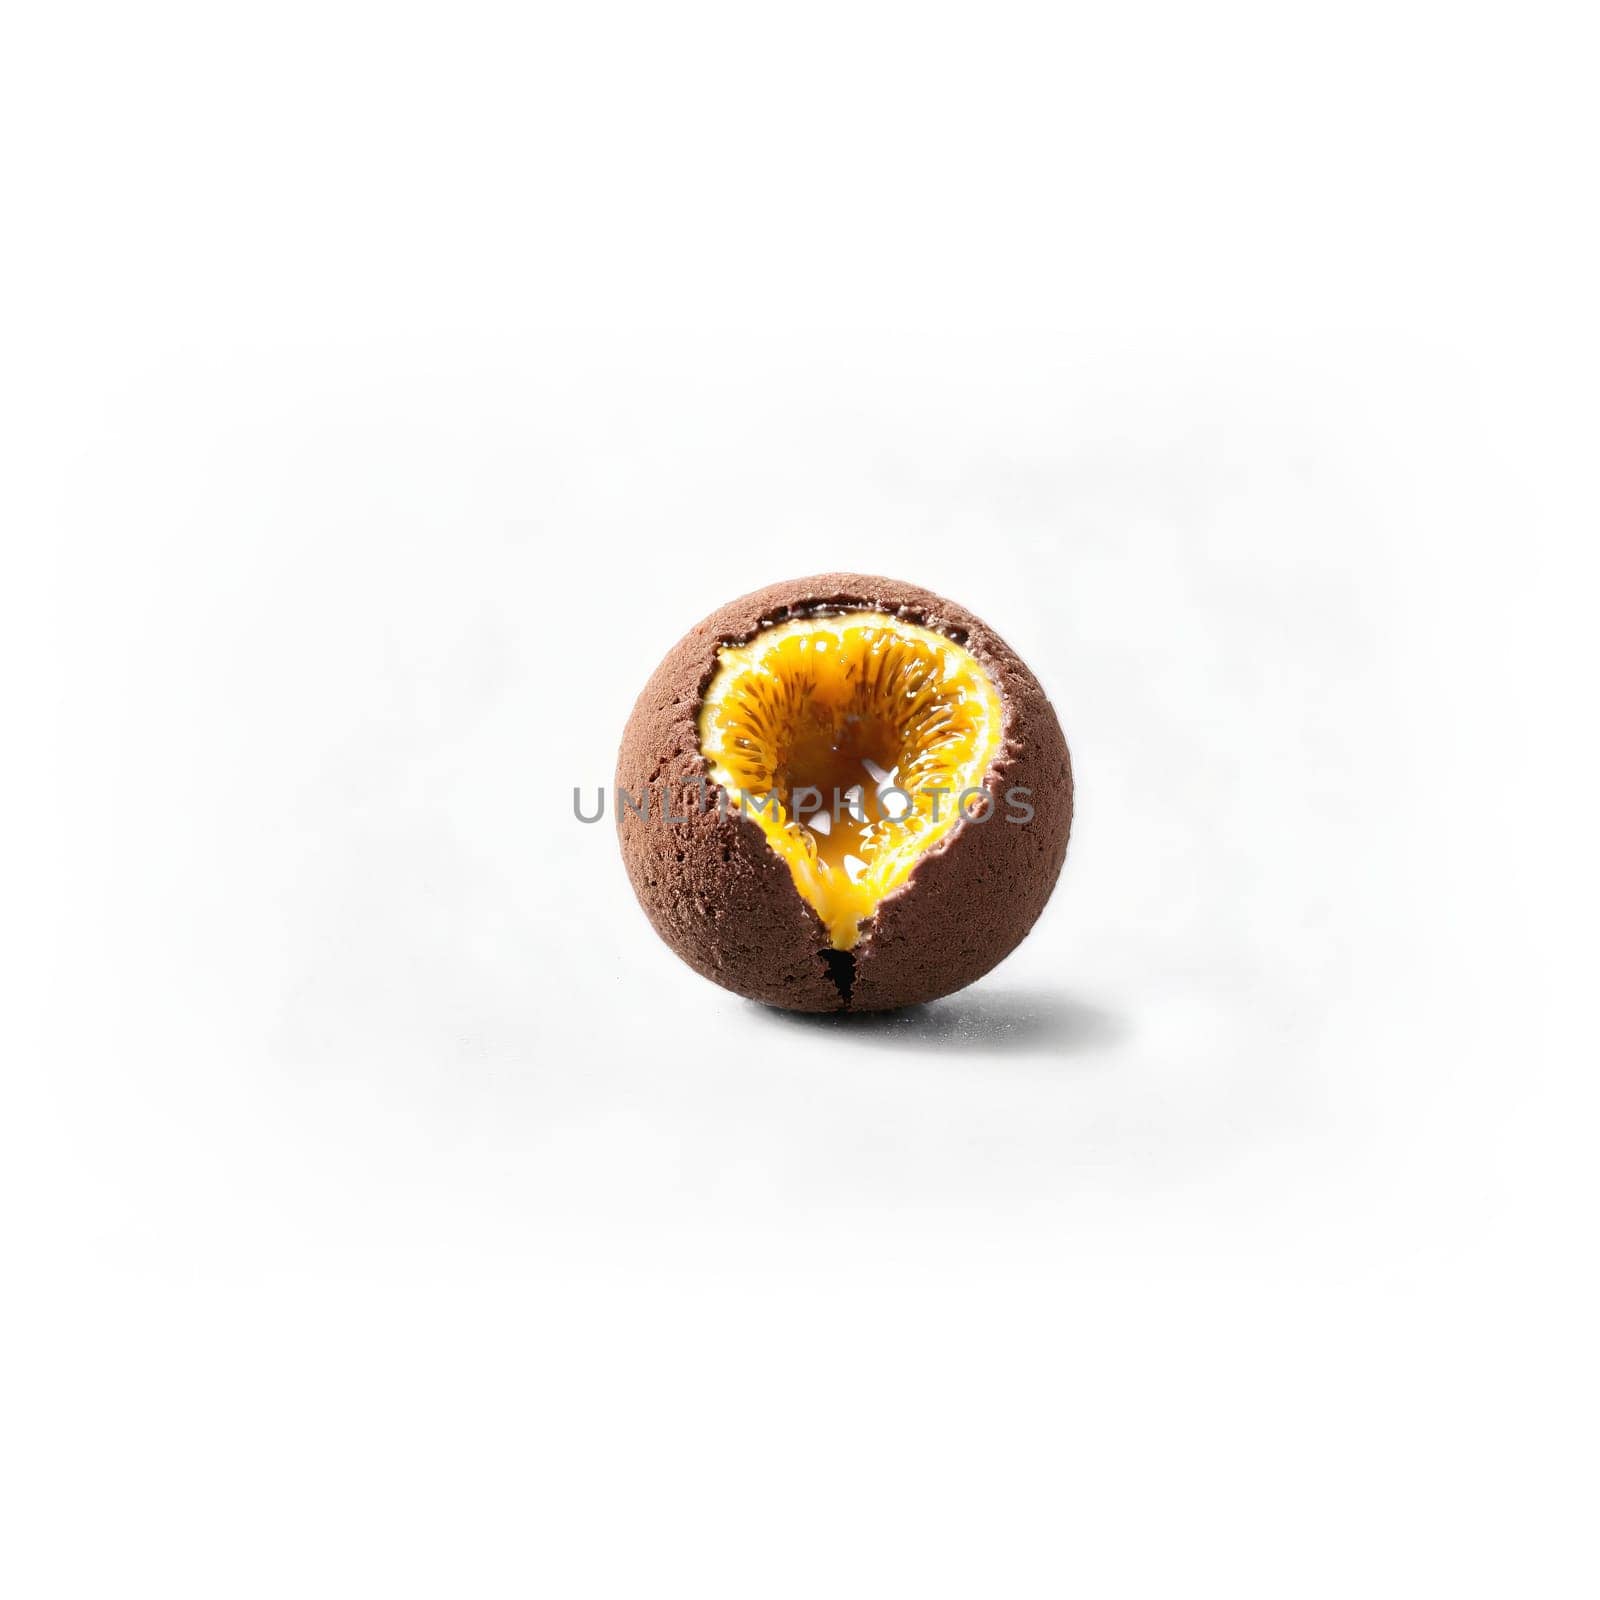 Passion fruit caramel truffles dusted with cocoa powder split open to reveal a gooey tropical by panophotograph